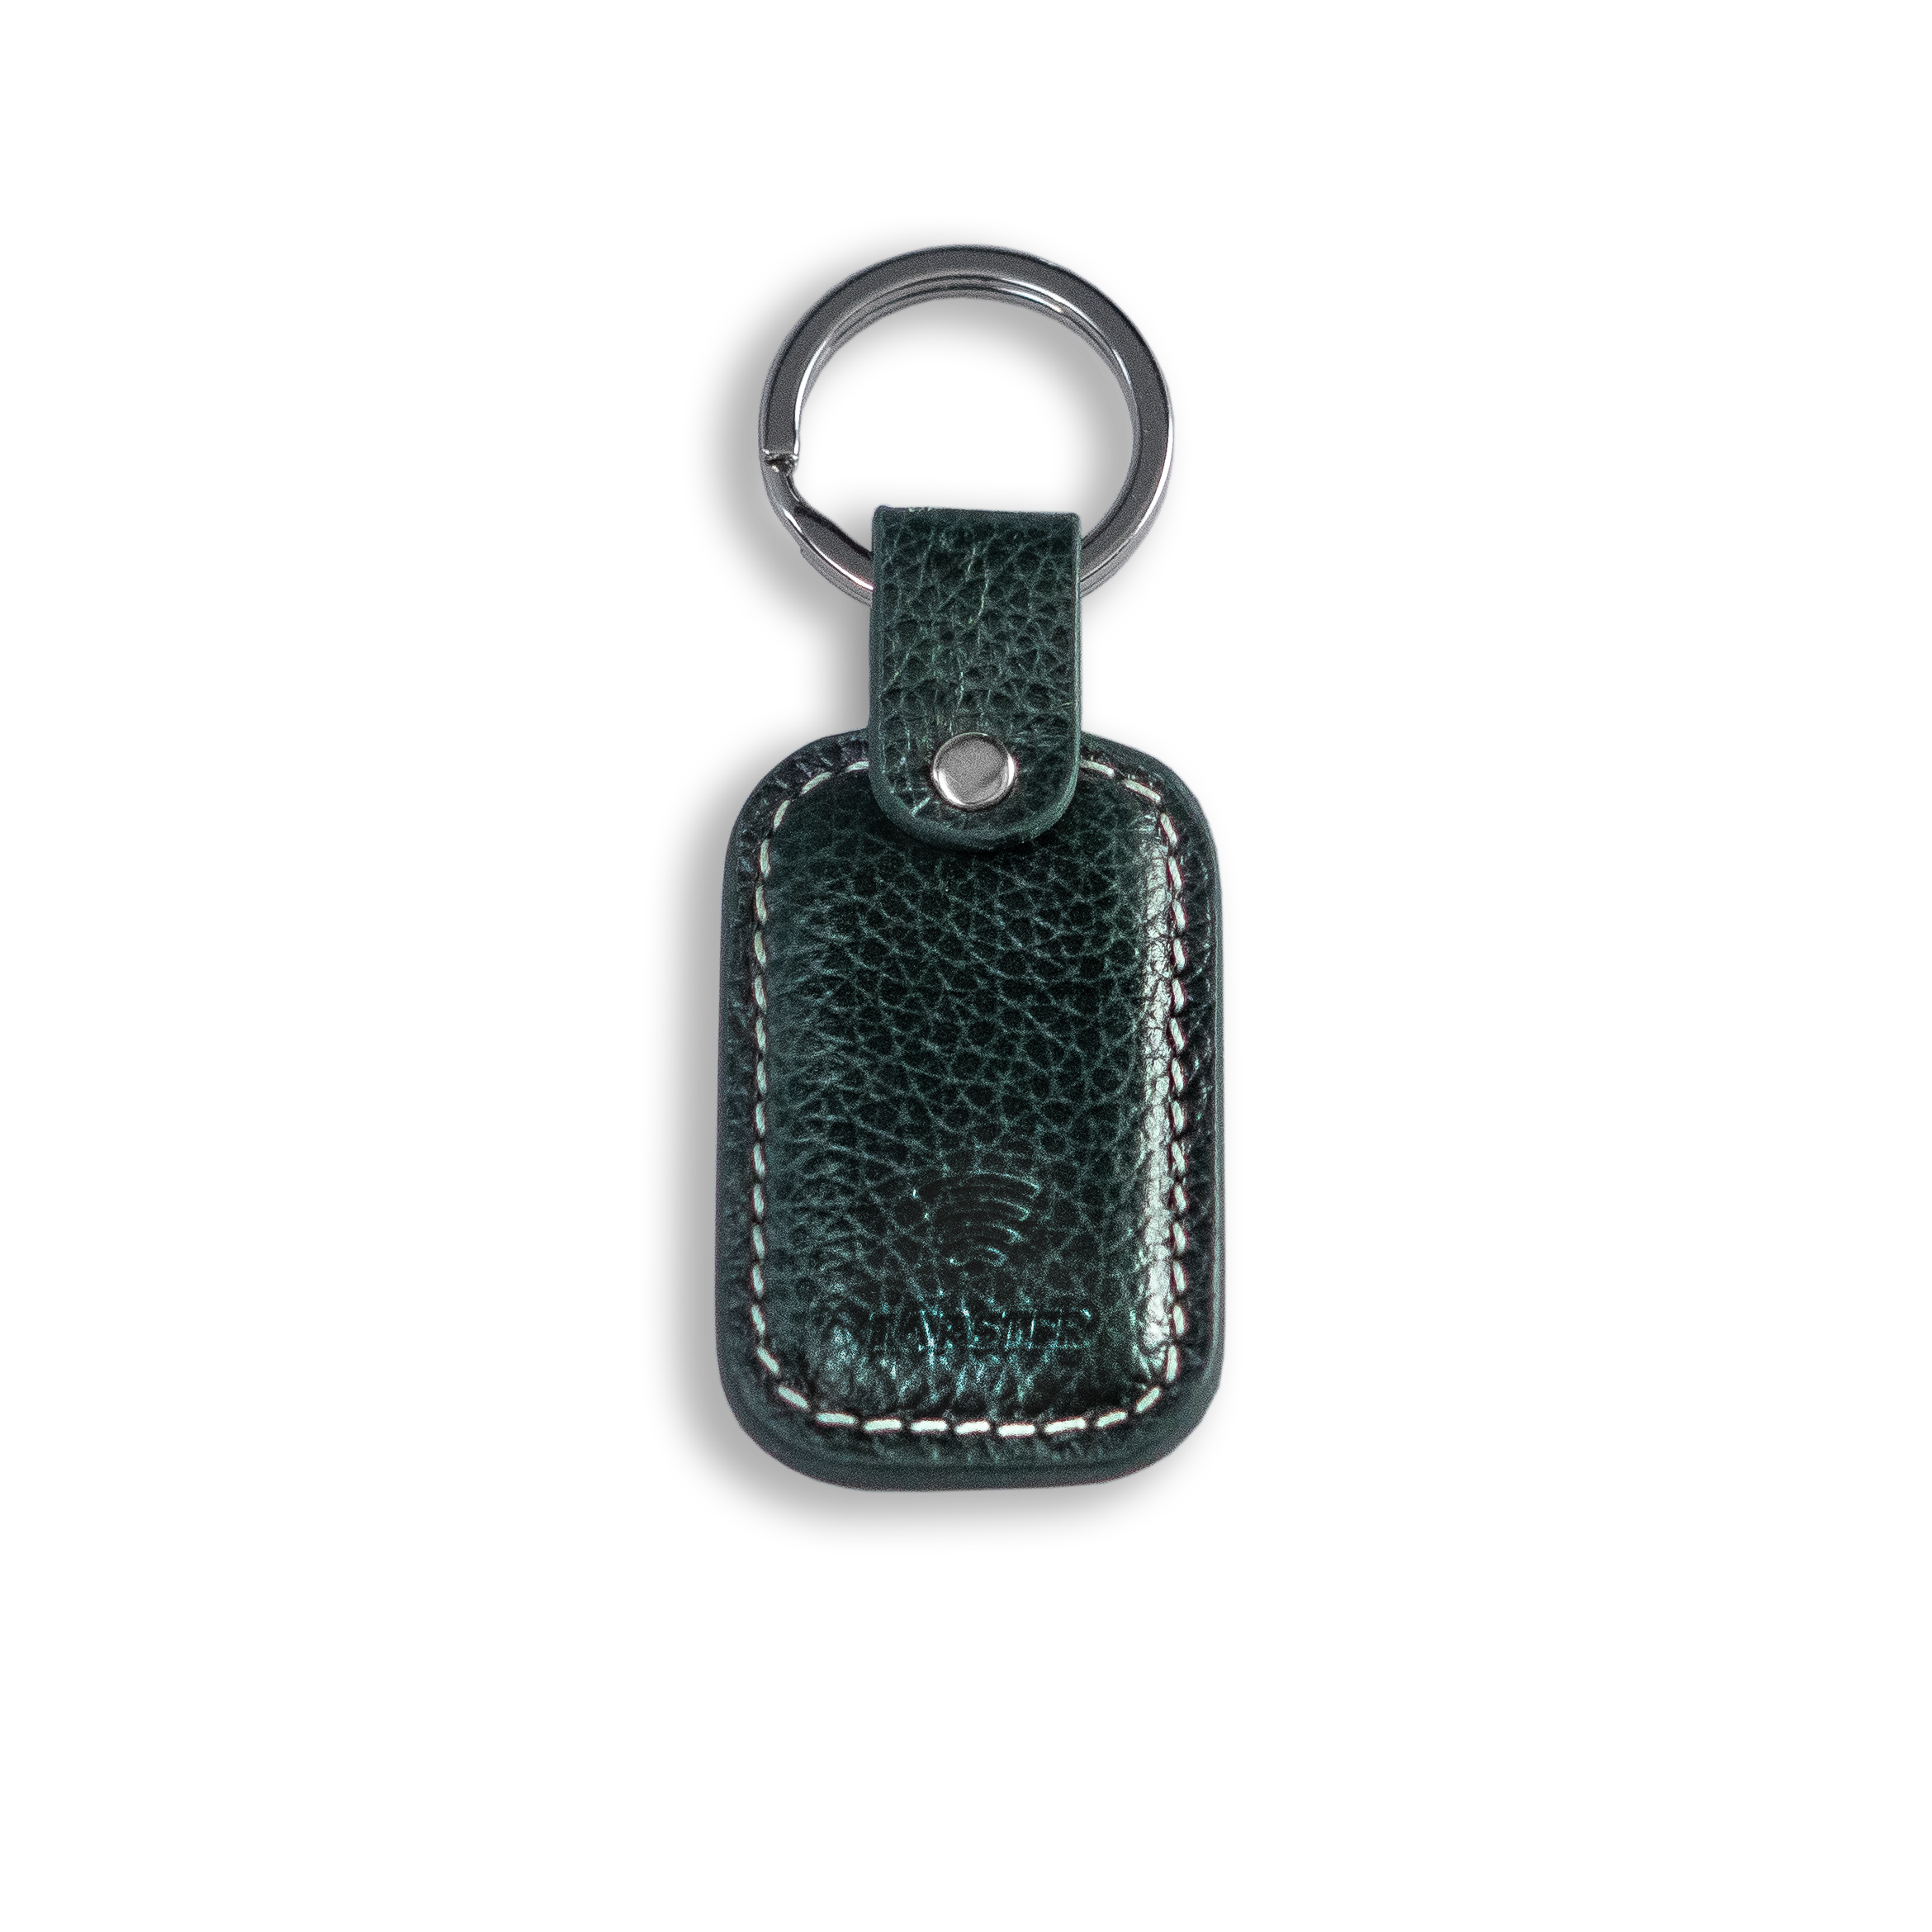 <img src="tapster.png" alt="Green-contactless keyring leather">